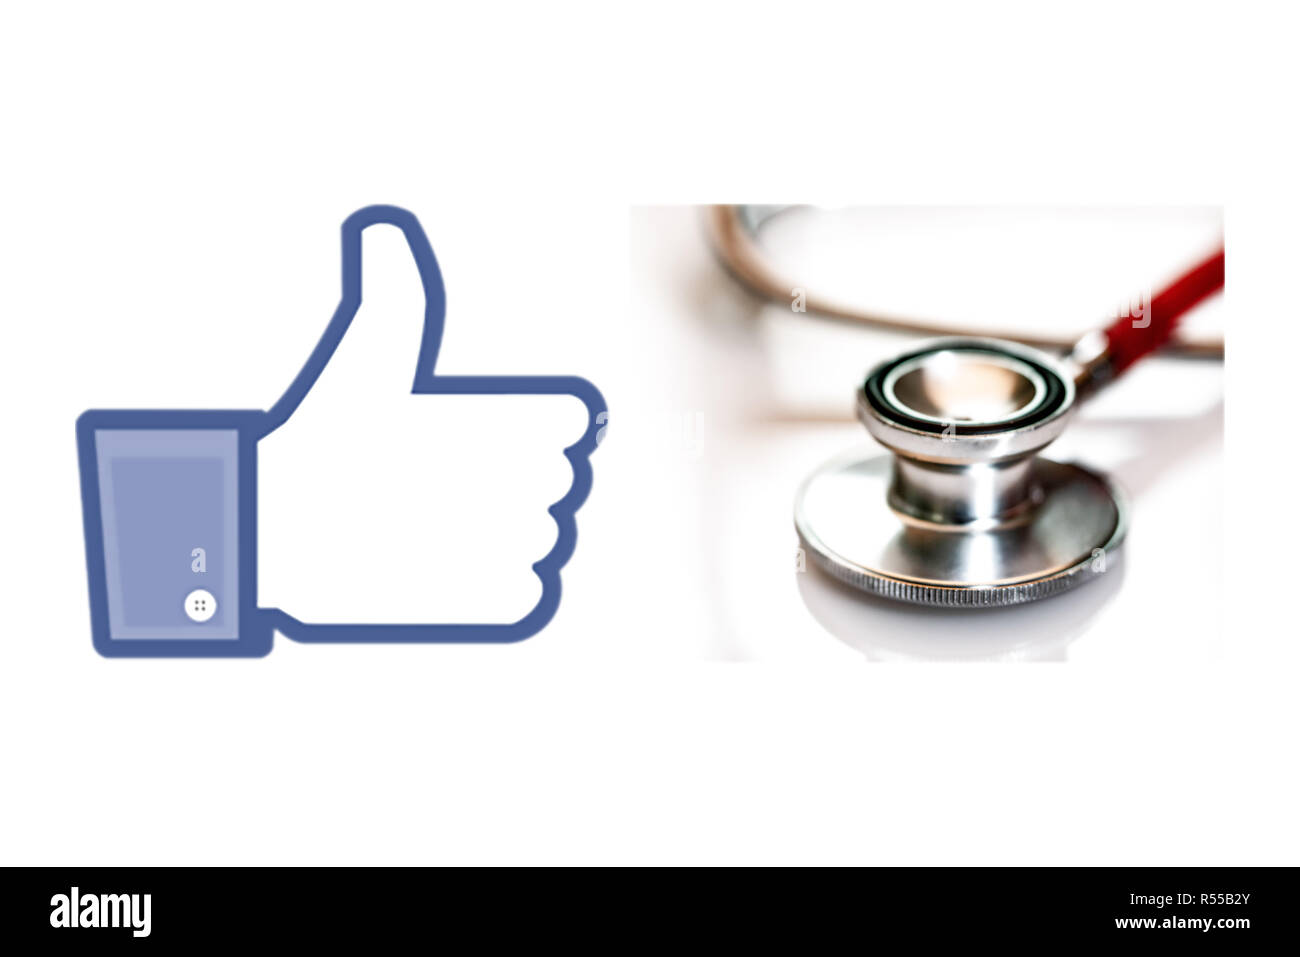 Illustration on the notation of doctors on social networks, Like and stethoscope. Stock Photo